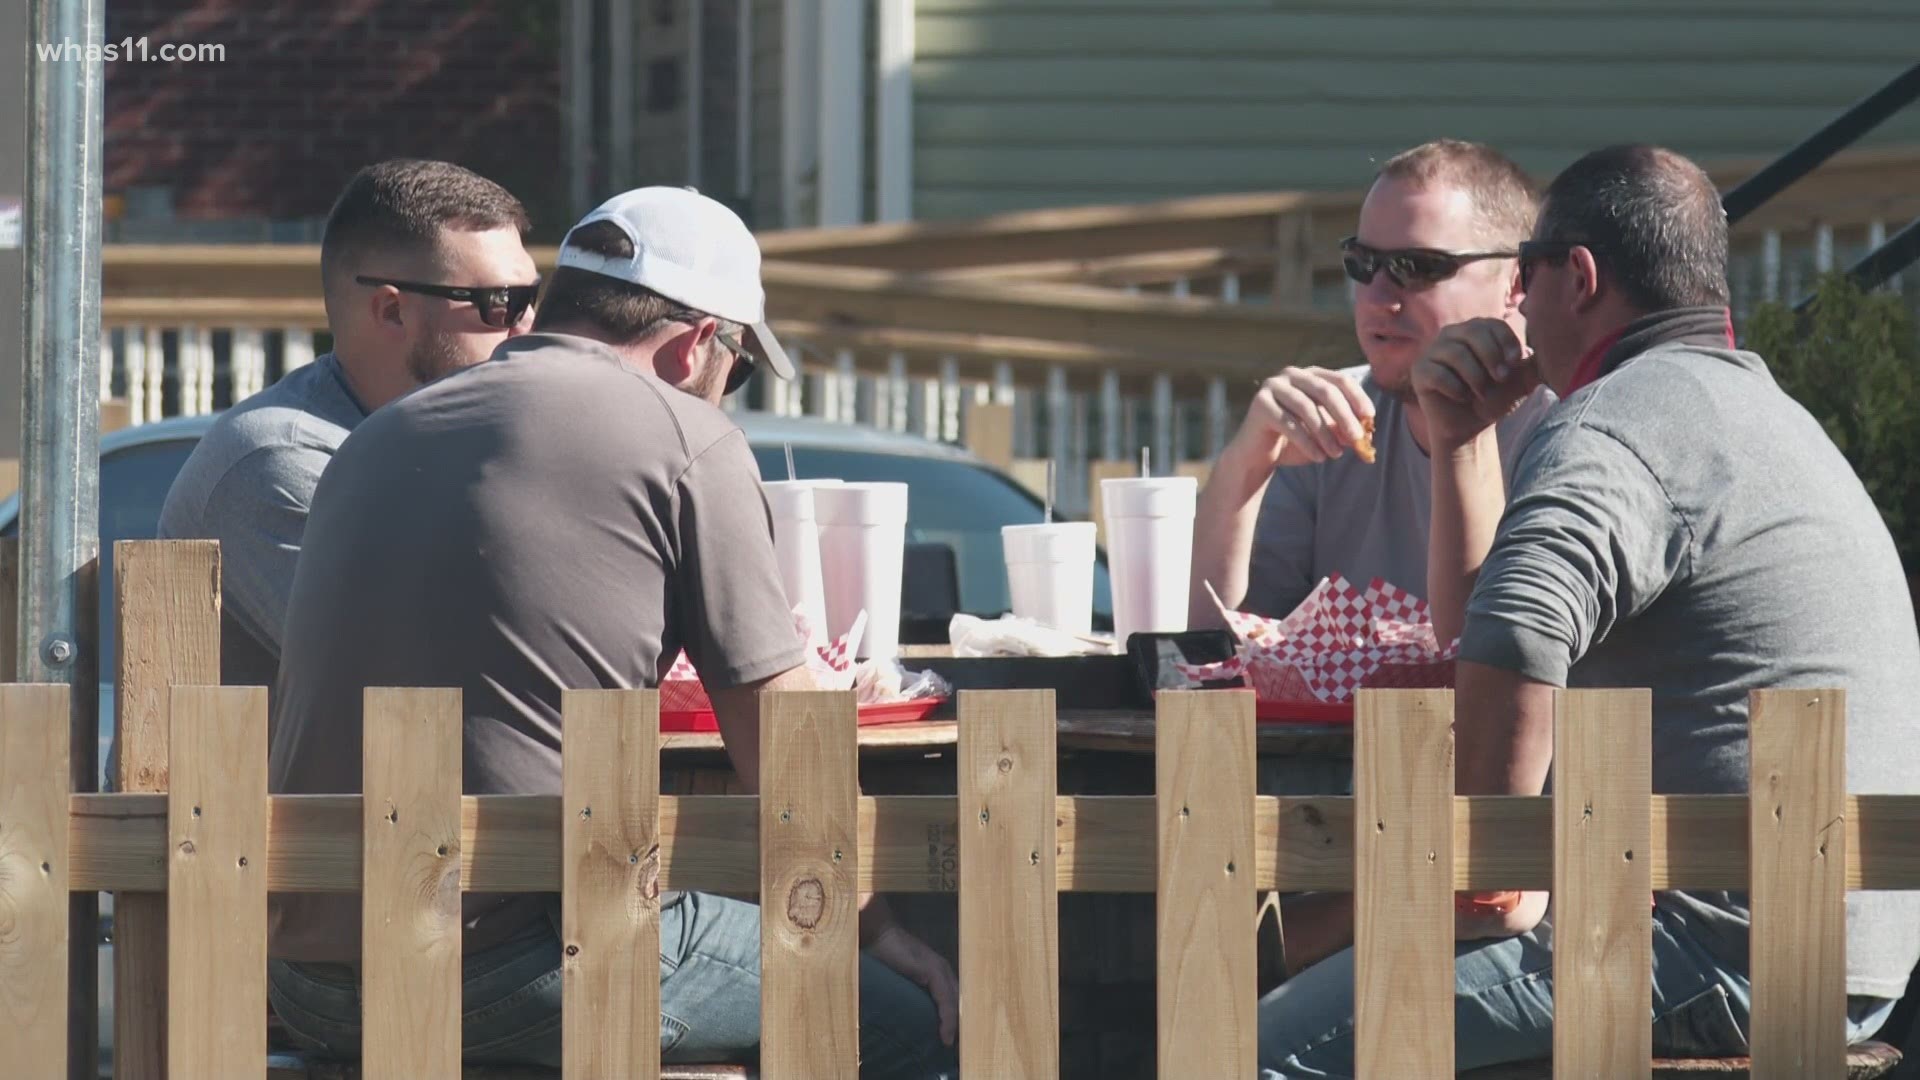 The weekend move gives local businesses and restaurants to offer more outdoor seating and better social distancing.